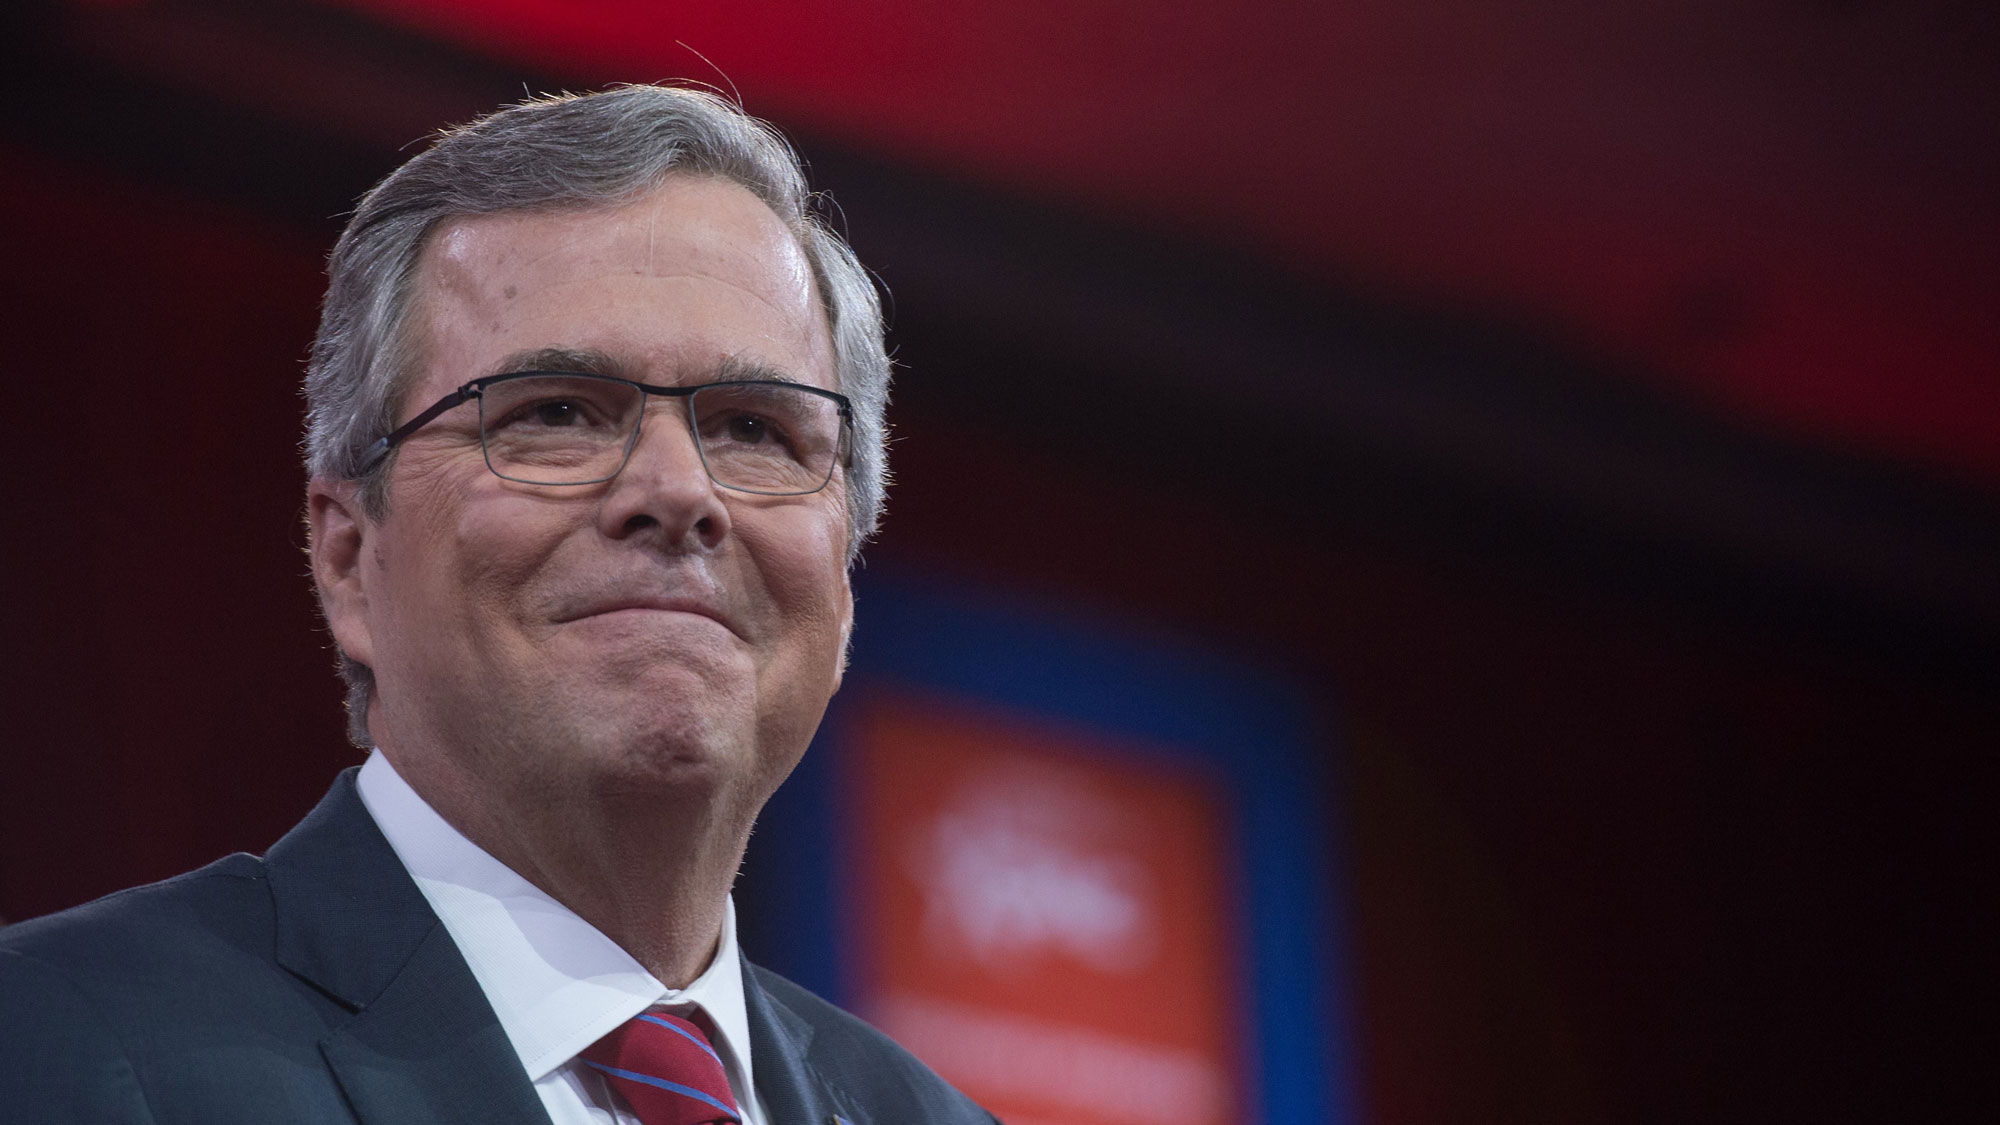 Former Florida Governor Jeb Bush speaks on stage with conservative political commentator Sean Hannity at the annual Conservative Political Action Conference (CPAC) at National Harbor, Maryland, outside Washington, on February 27, 2015.
